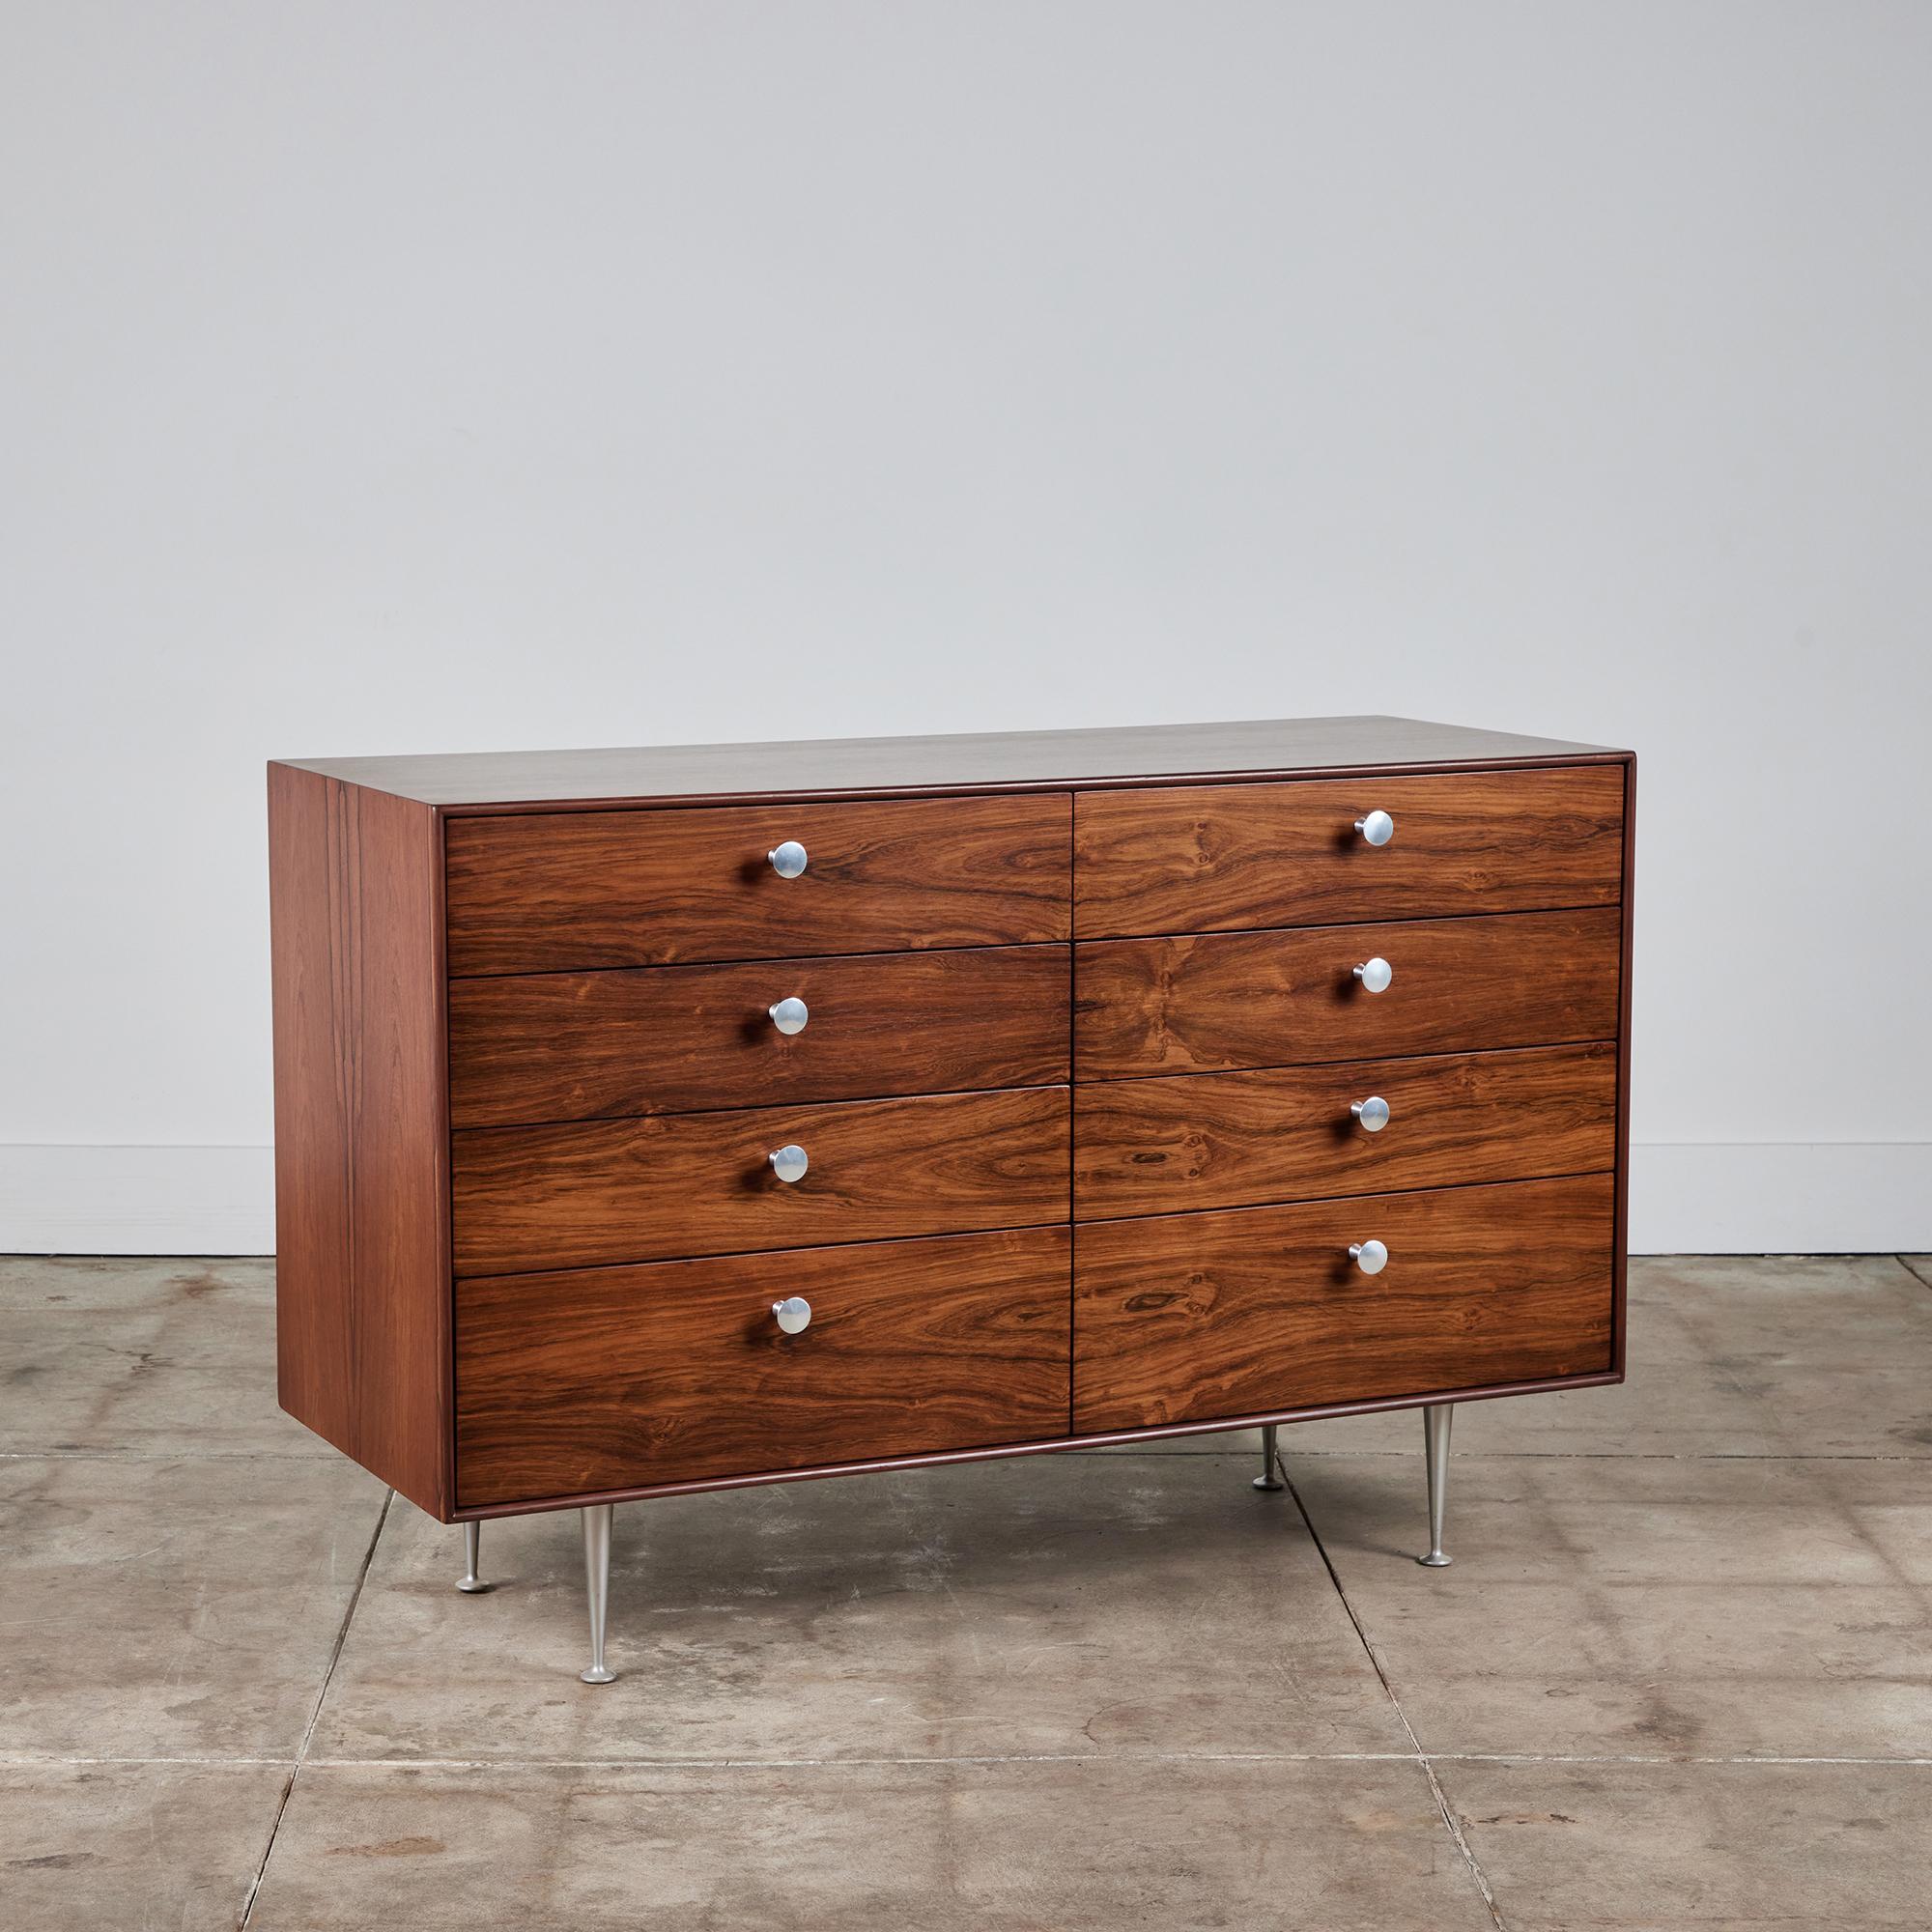 An eight-drawer double dresser from George Nelson’s Thin Edge collection for Herman Miller. Design features the slender rosewood case for which the series was named and a double stack of drawers, each with three wide drawers and one top divided